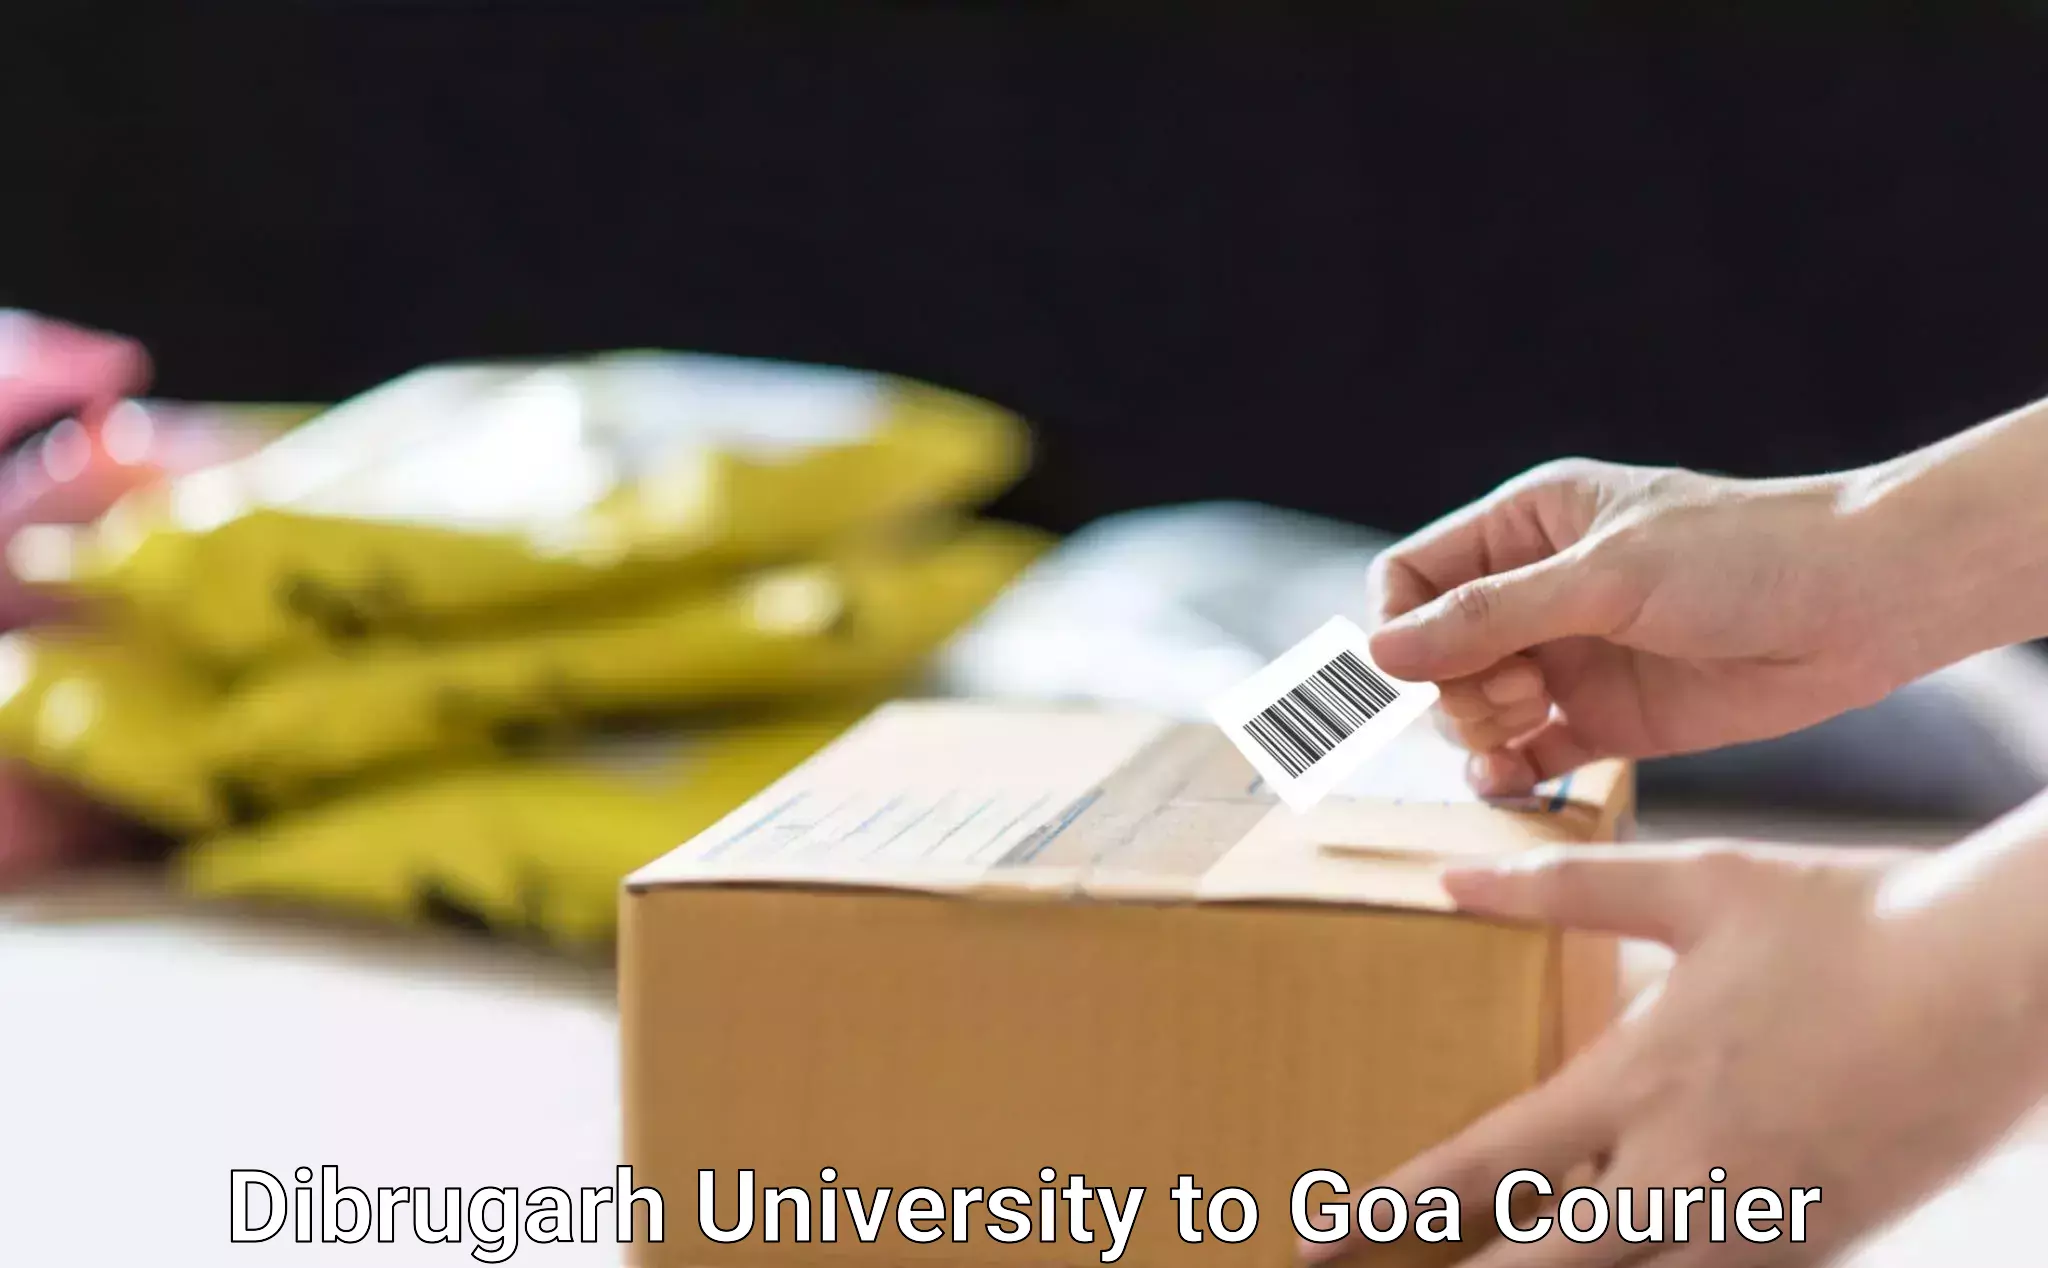 Personal courier services Dibrugarh University to Goa